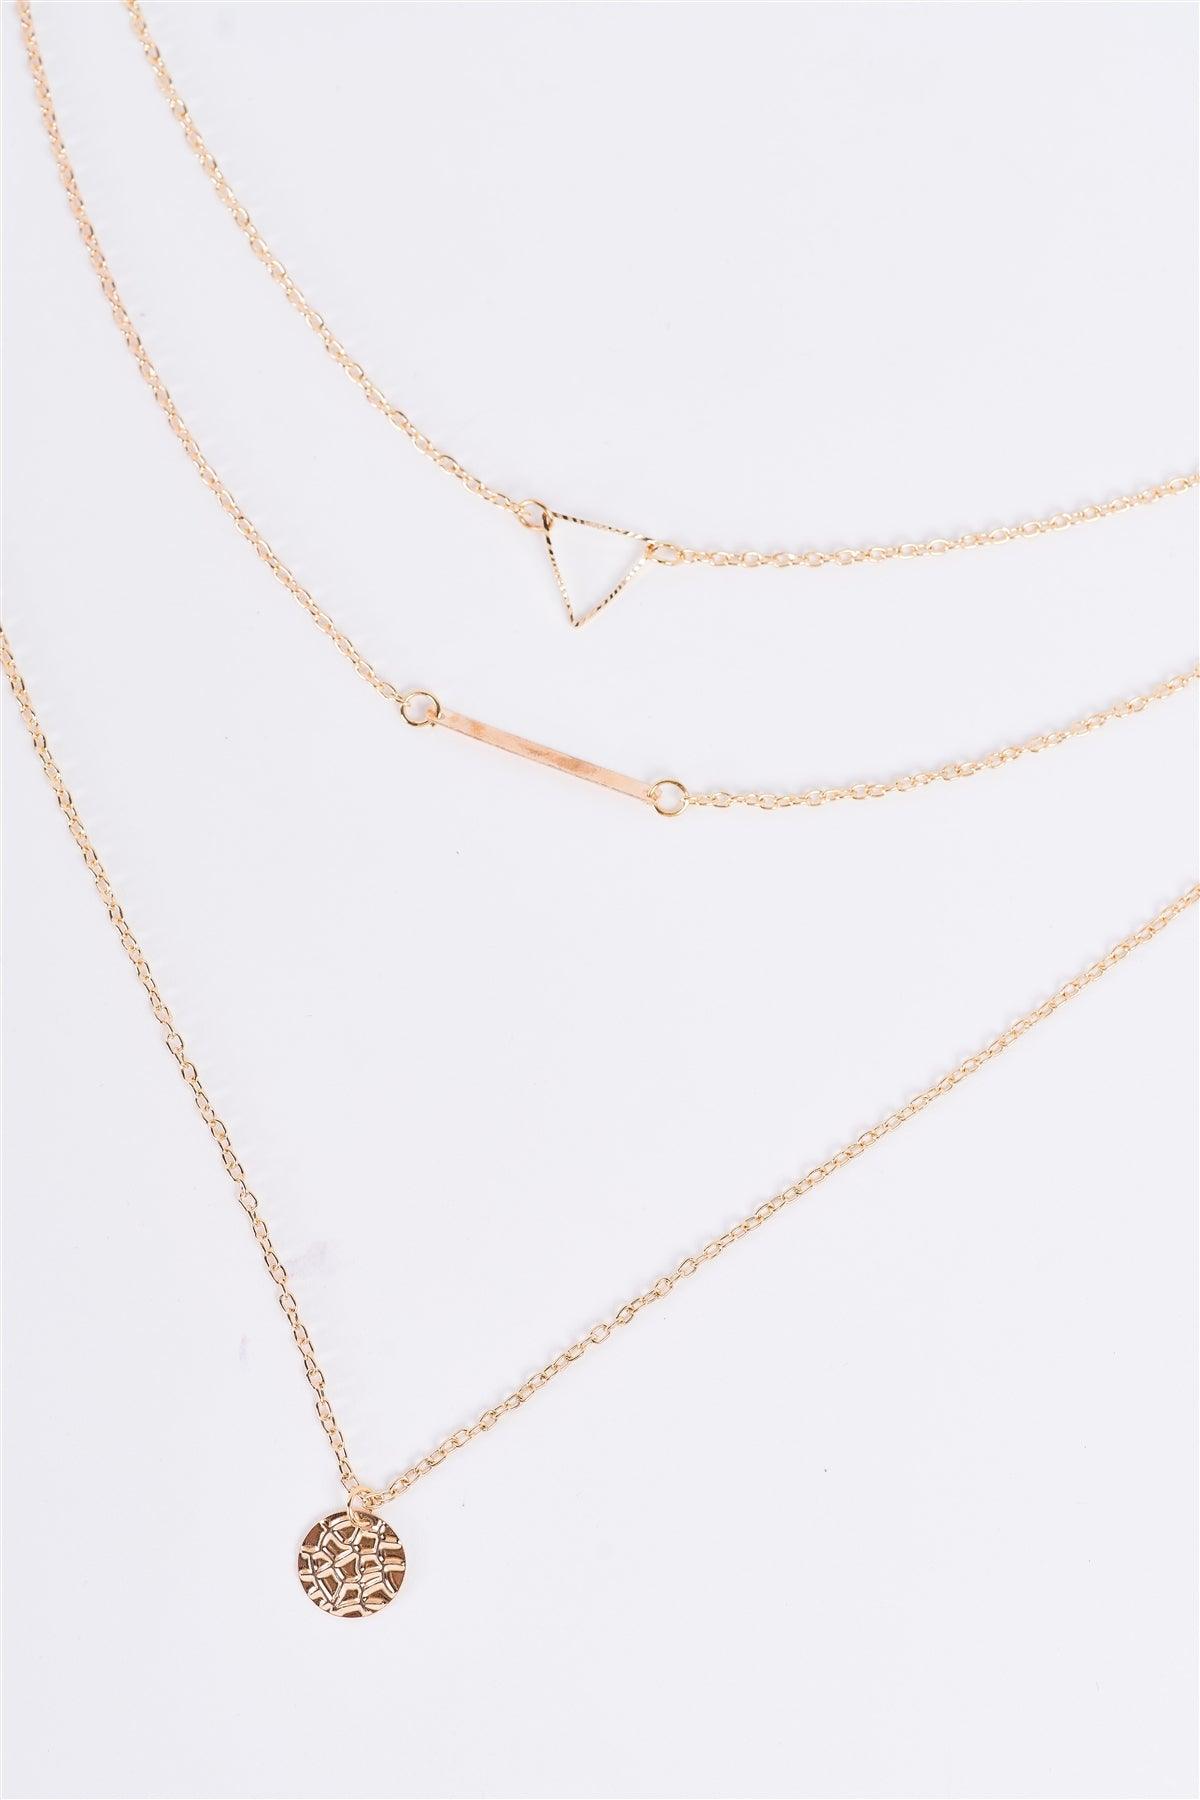 Gold Triple Layered Three Pendants Chain Necklace /3 Pieces